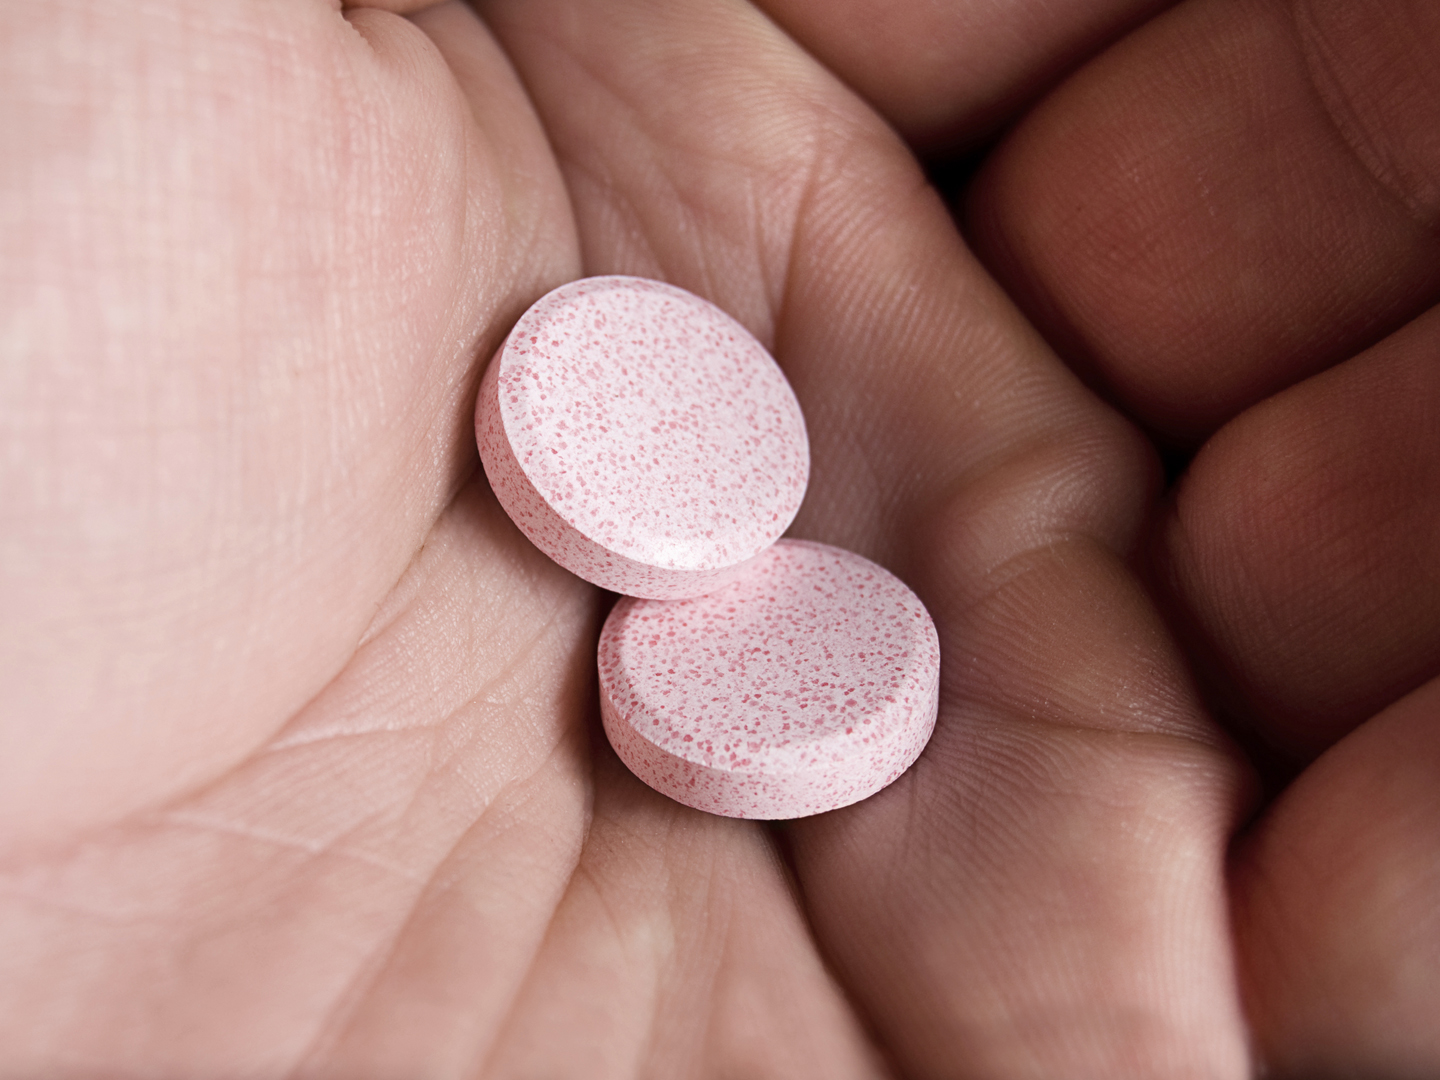 &quot;Generic antacid chewables sit in the palm of a male&#039;s hand.  Used for treatment of acid reflux, indigestion, upset stomach, and or diarrhea.  Color image, horizontal orientation.  Hard lighting for effect.&quot;